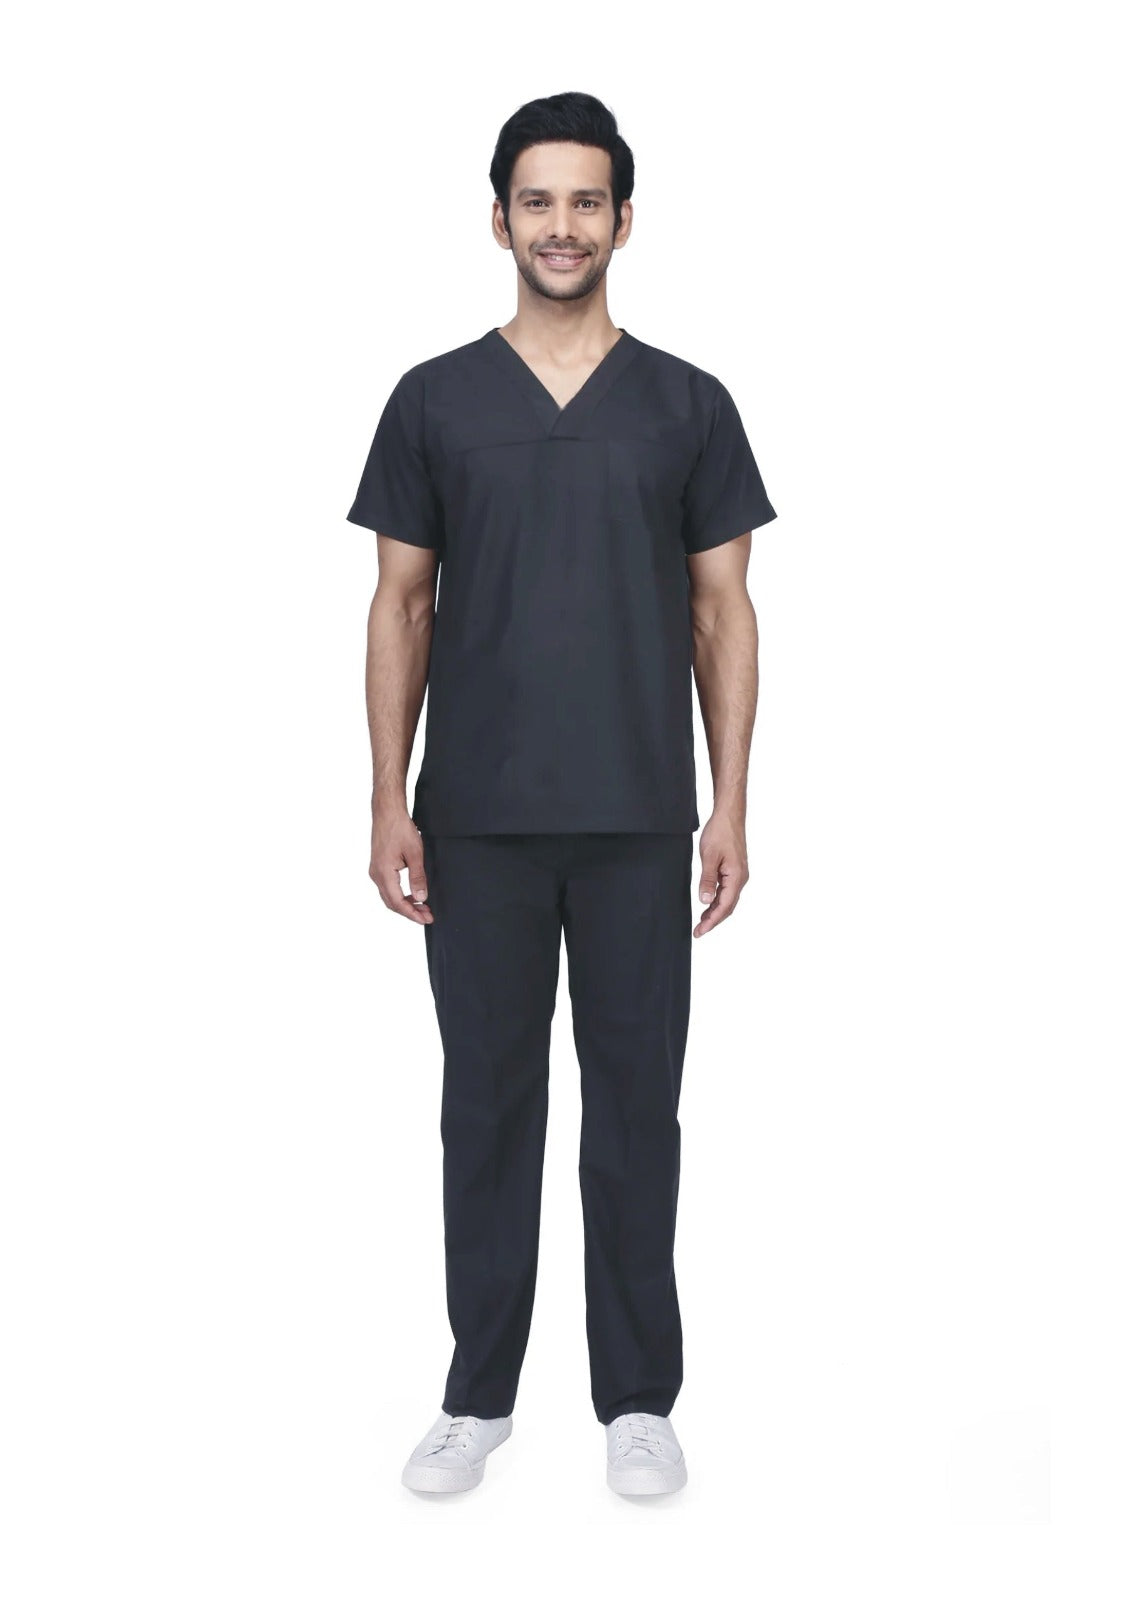 STYLE NAME: UNISEX V NECK “’CAPE TOWN’” SCRUB SUIT - Professional AE